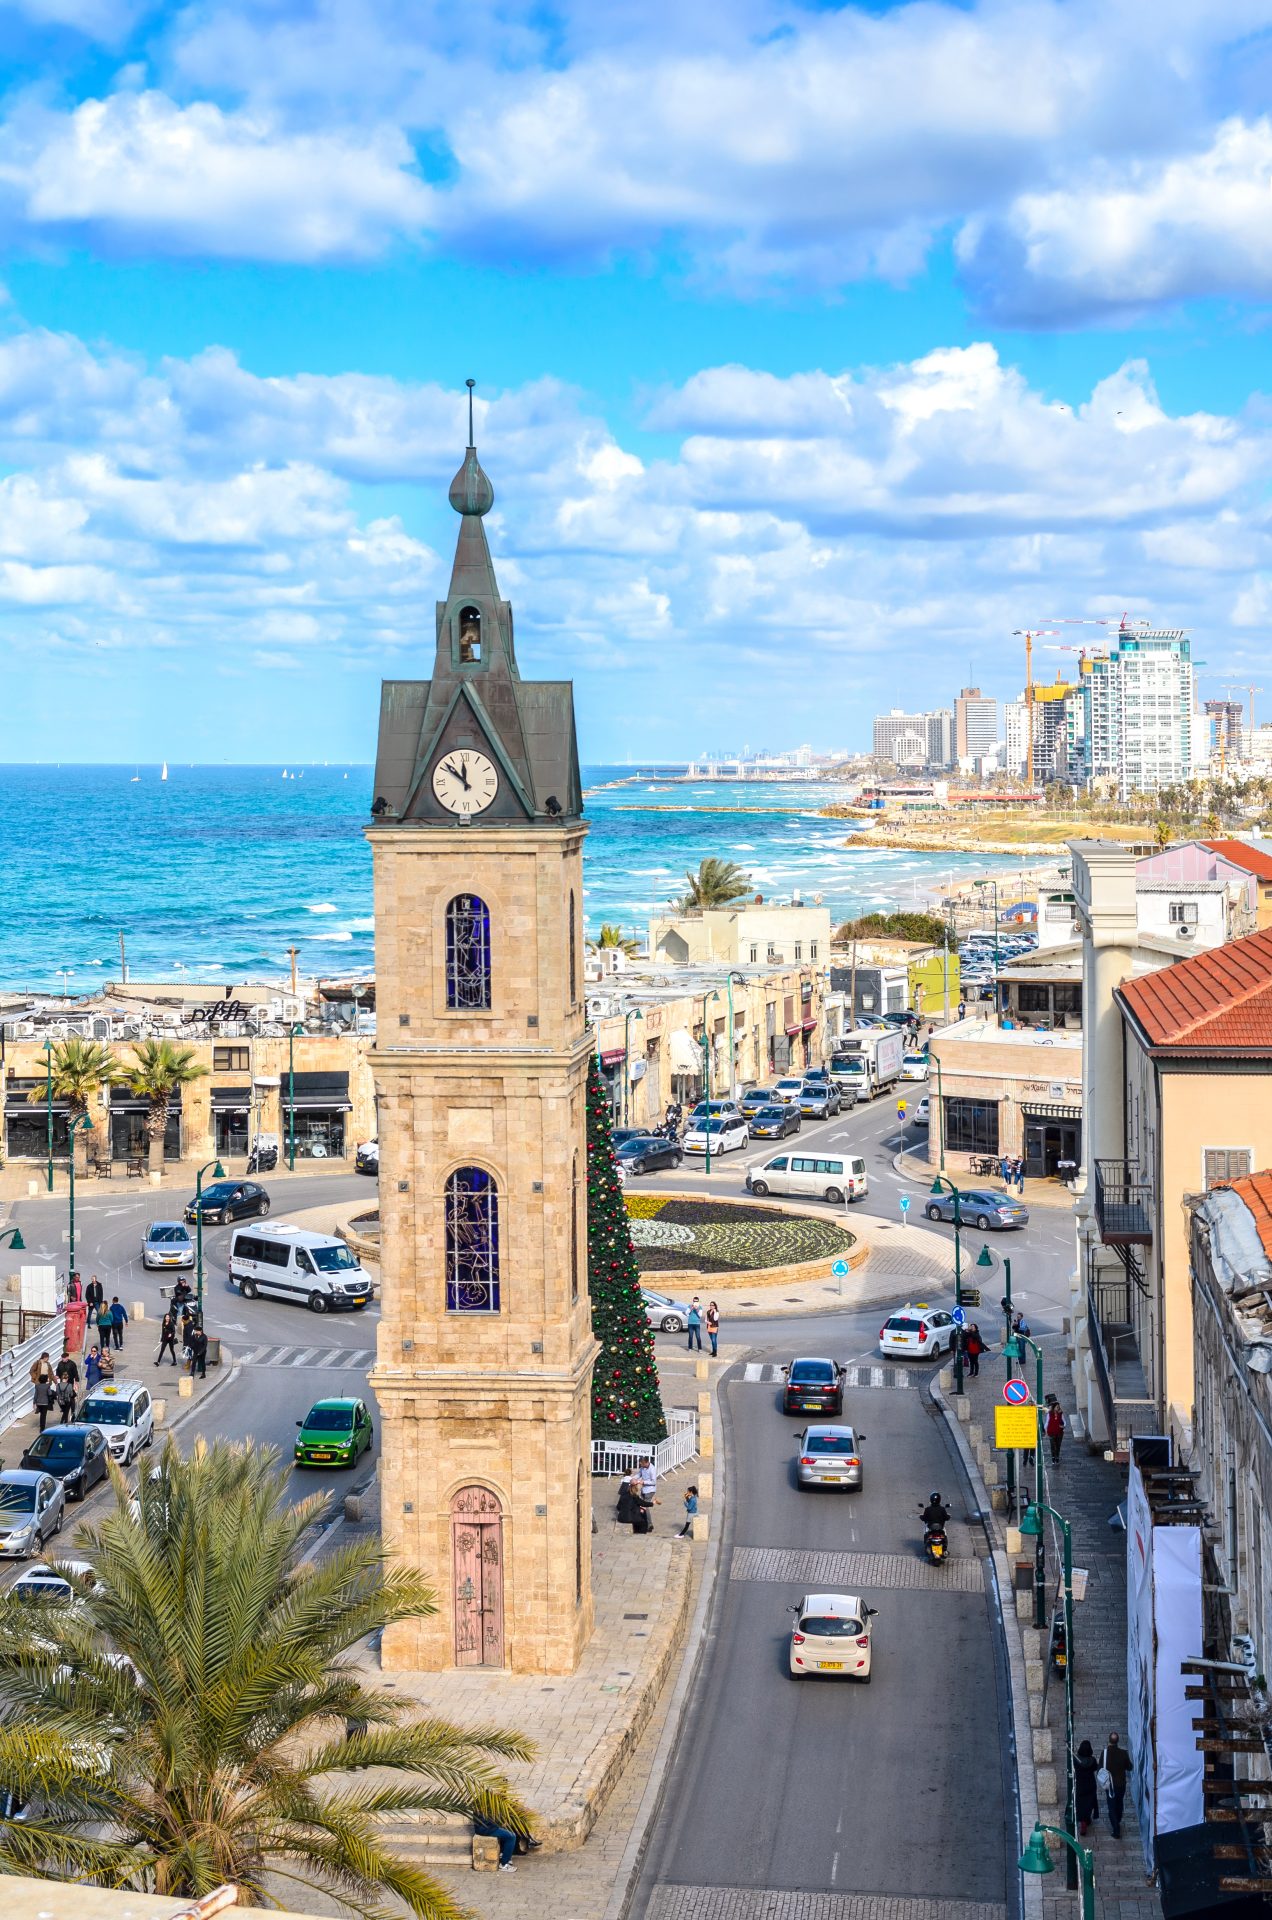 Jaffa old city clock tower. Tel Aviv in the background